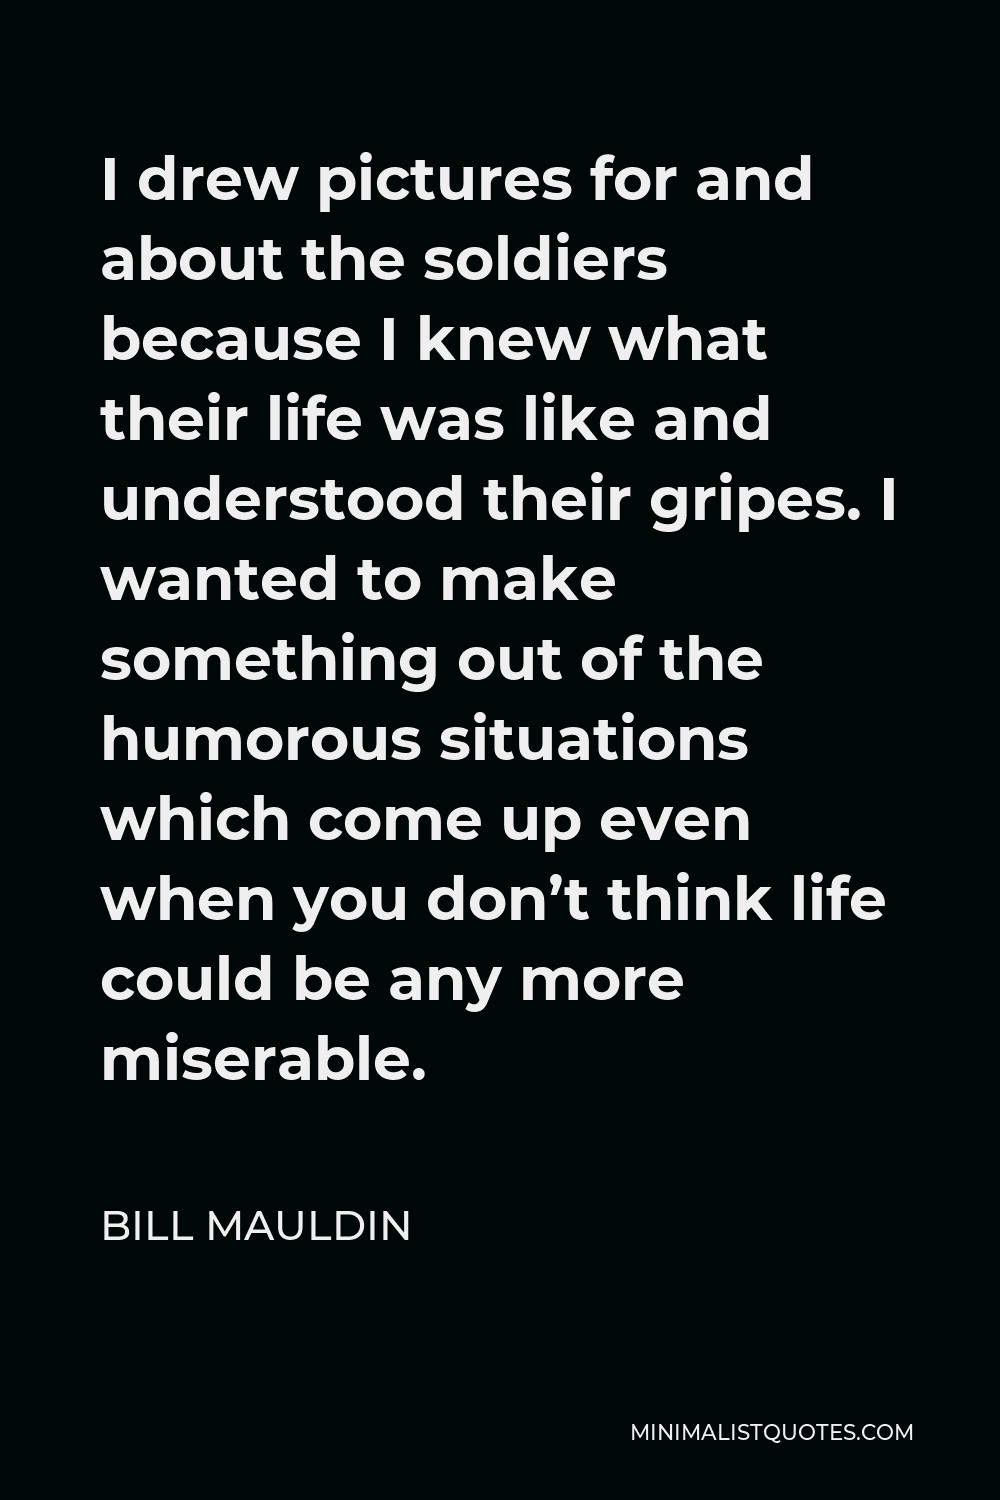 Bill Mauldin Quote - I drew pictures for and about the soldiers because I knew what their life was like and understood their gripes. I wanted to make something out of the humorous situations which come up even when you don’t think life could be any more miserable.